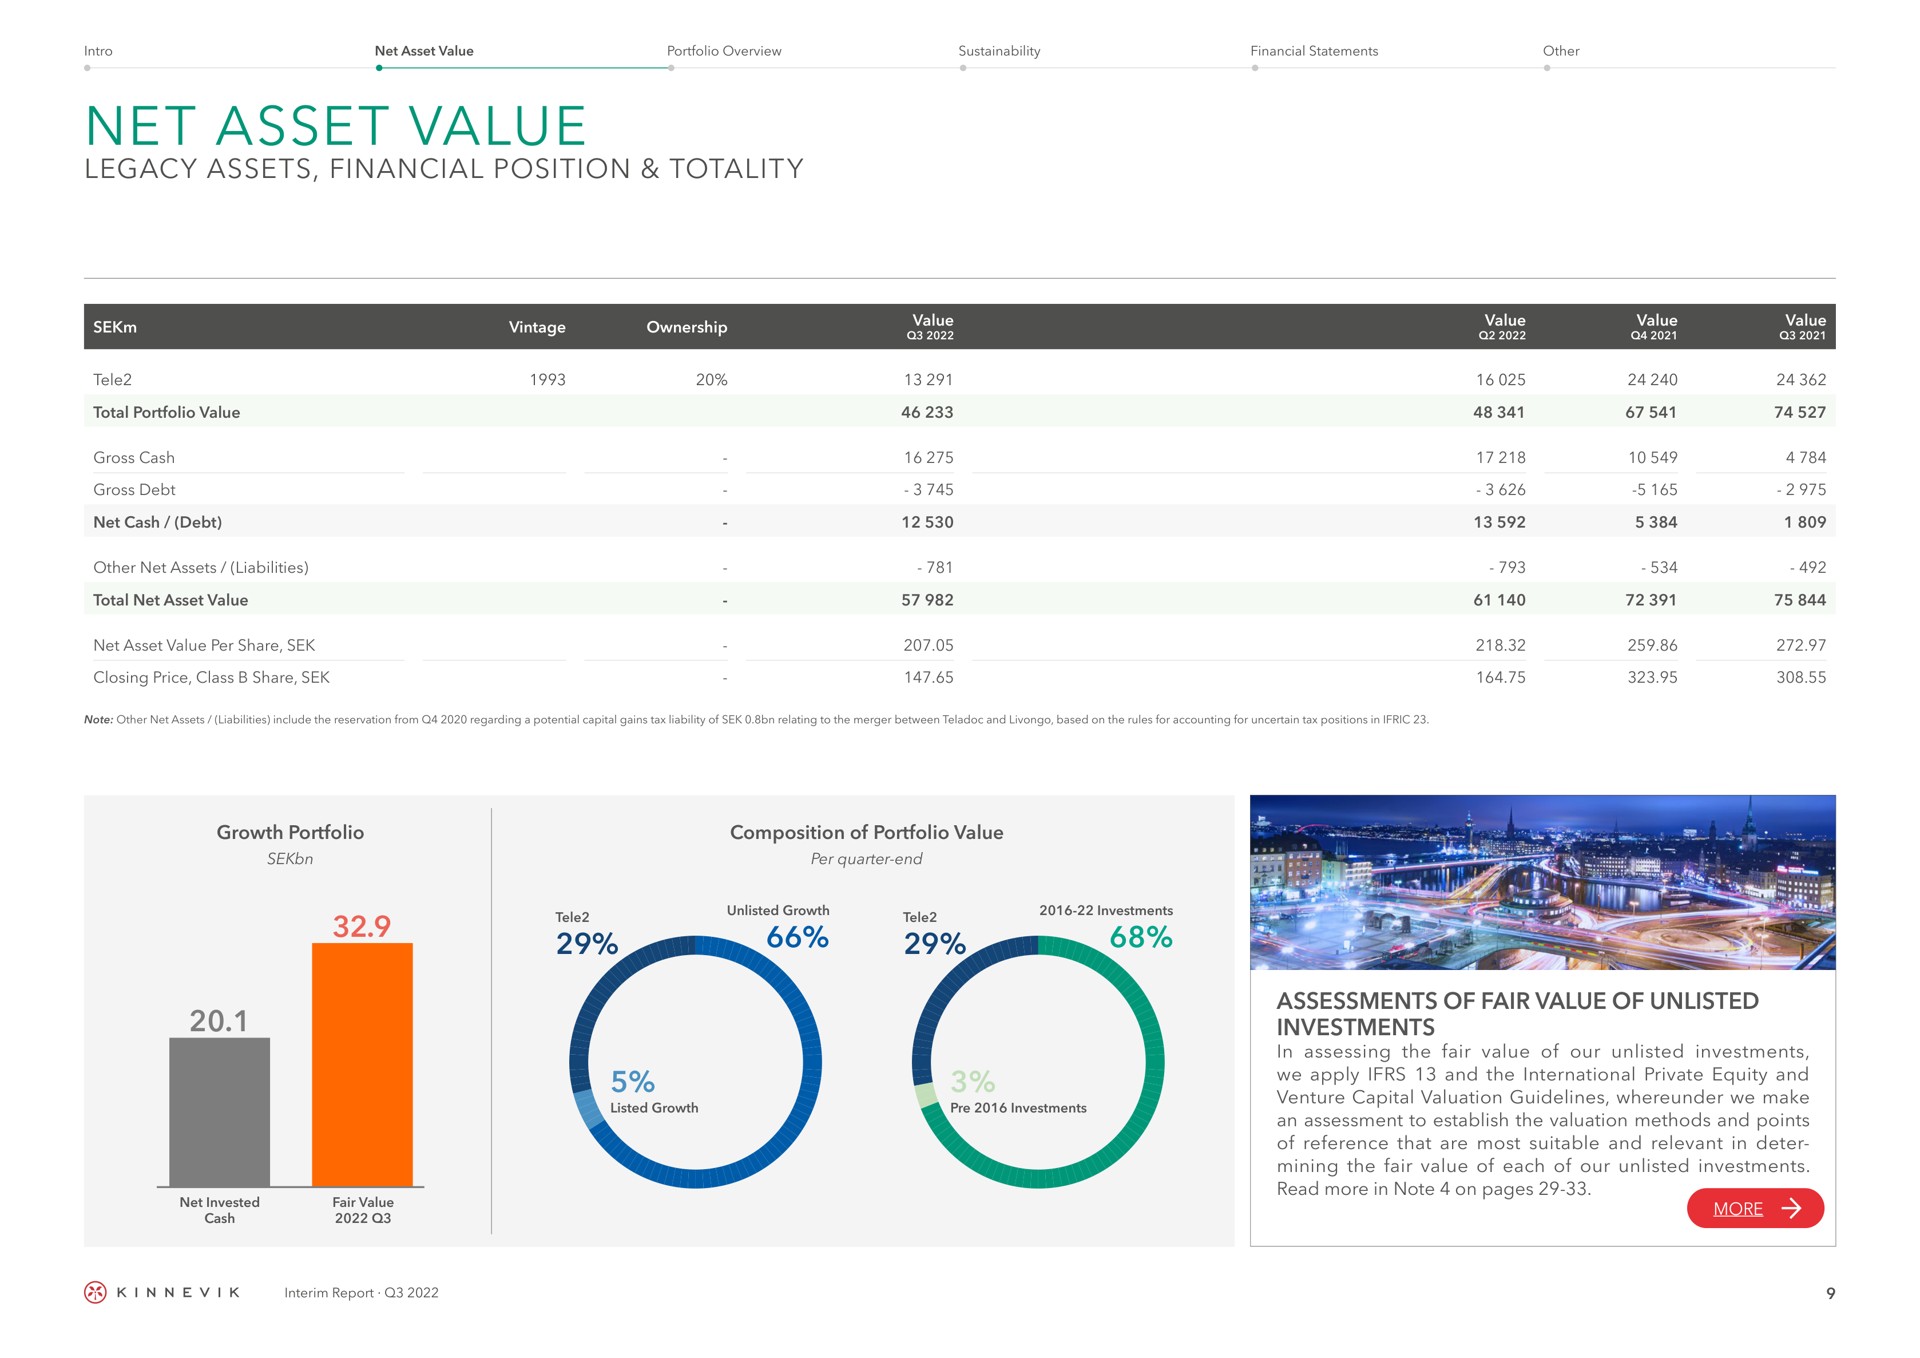 net asset value legacy assets financial position assessments of fair value of unlisted investments totality growth portfolio composition portfolio interim report an assessment to establish the valuation methods and points mining the each our | Kinnevik